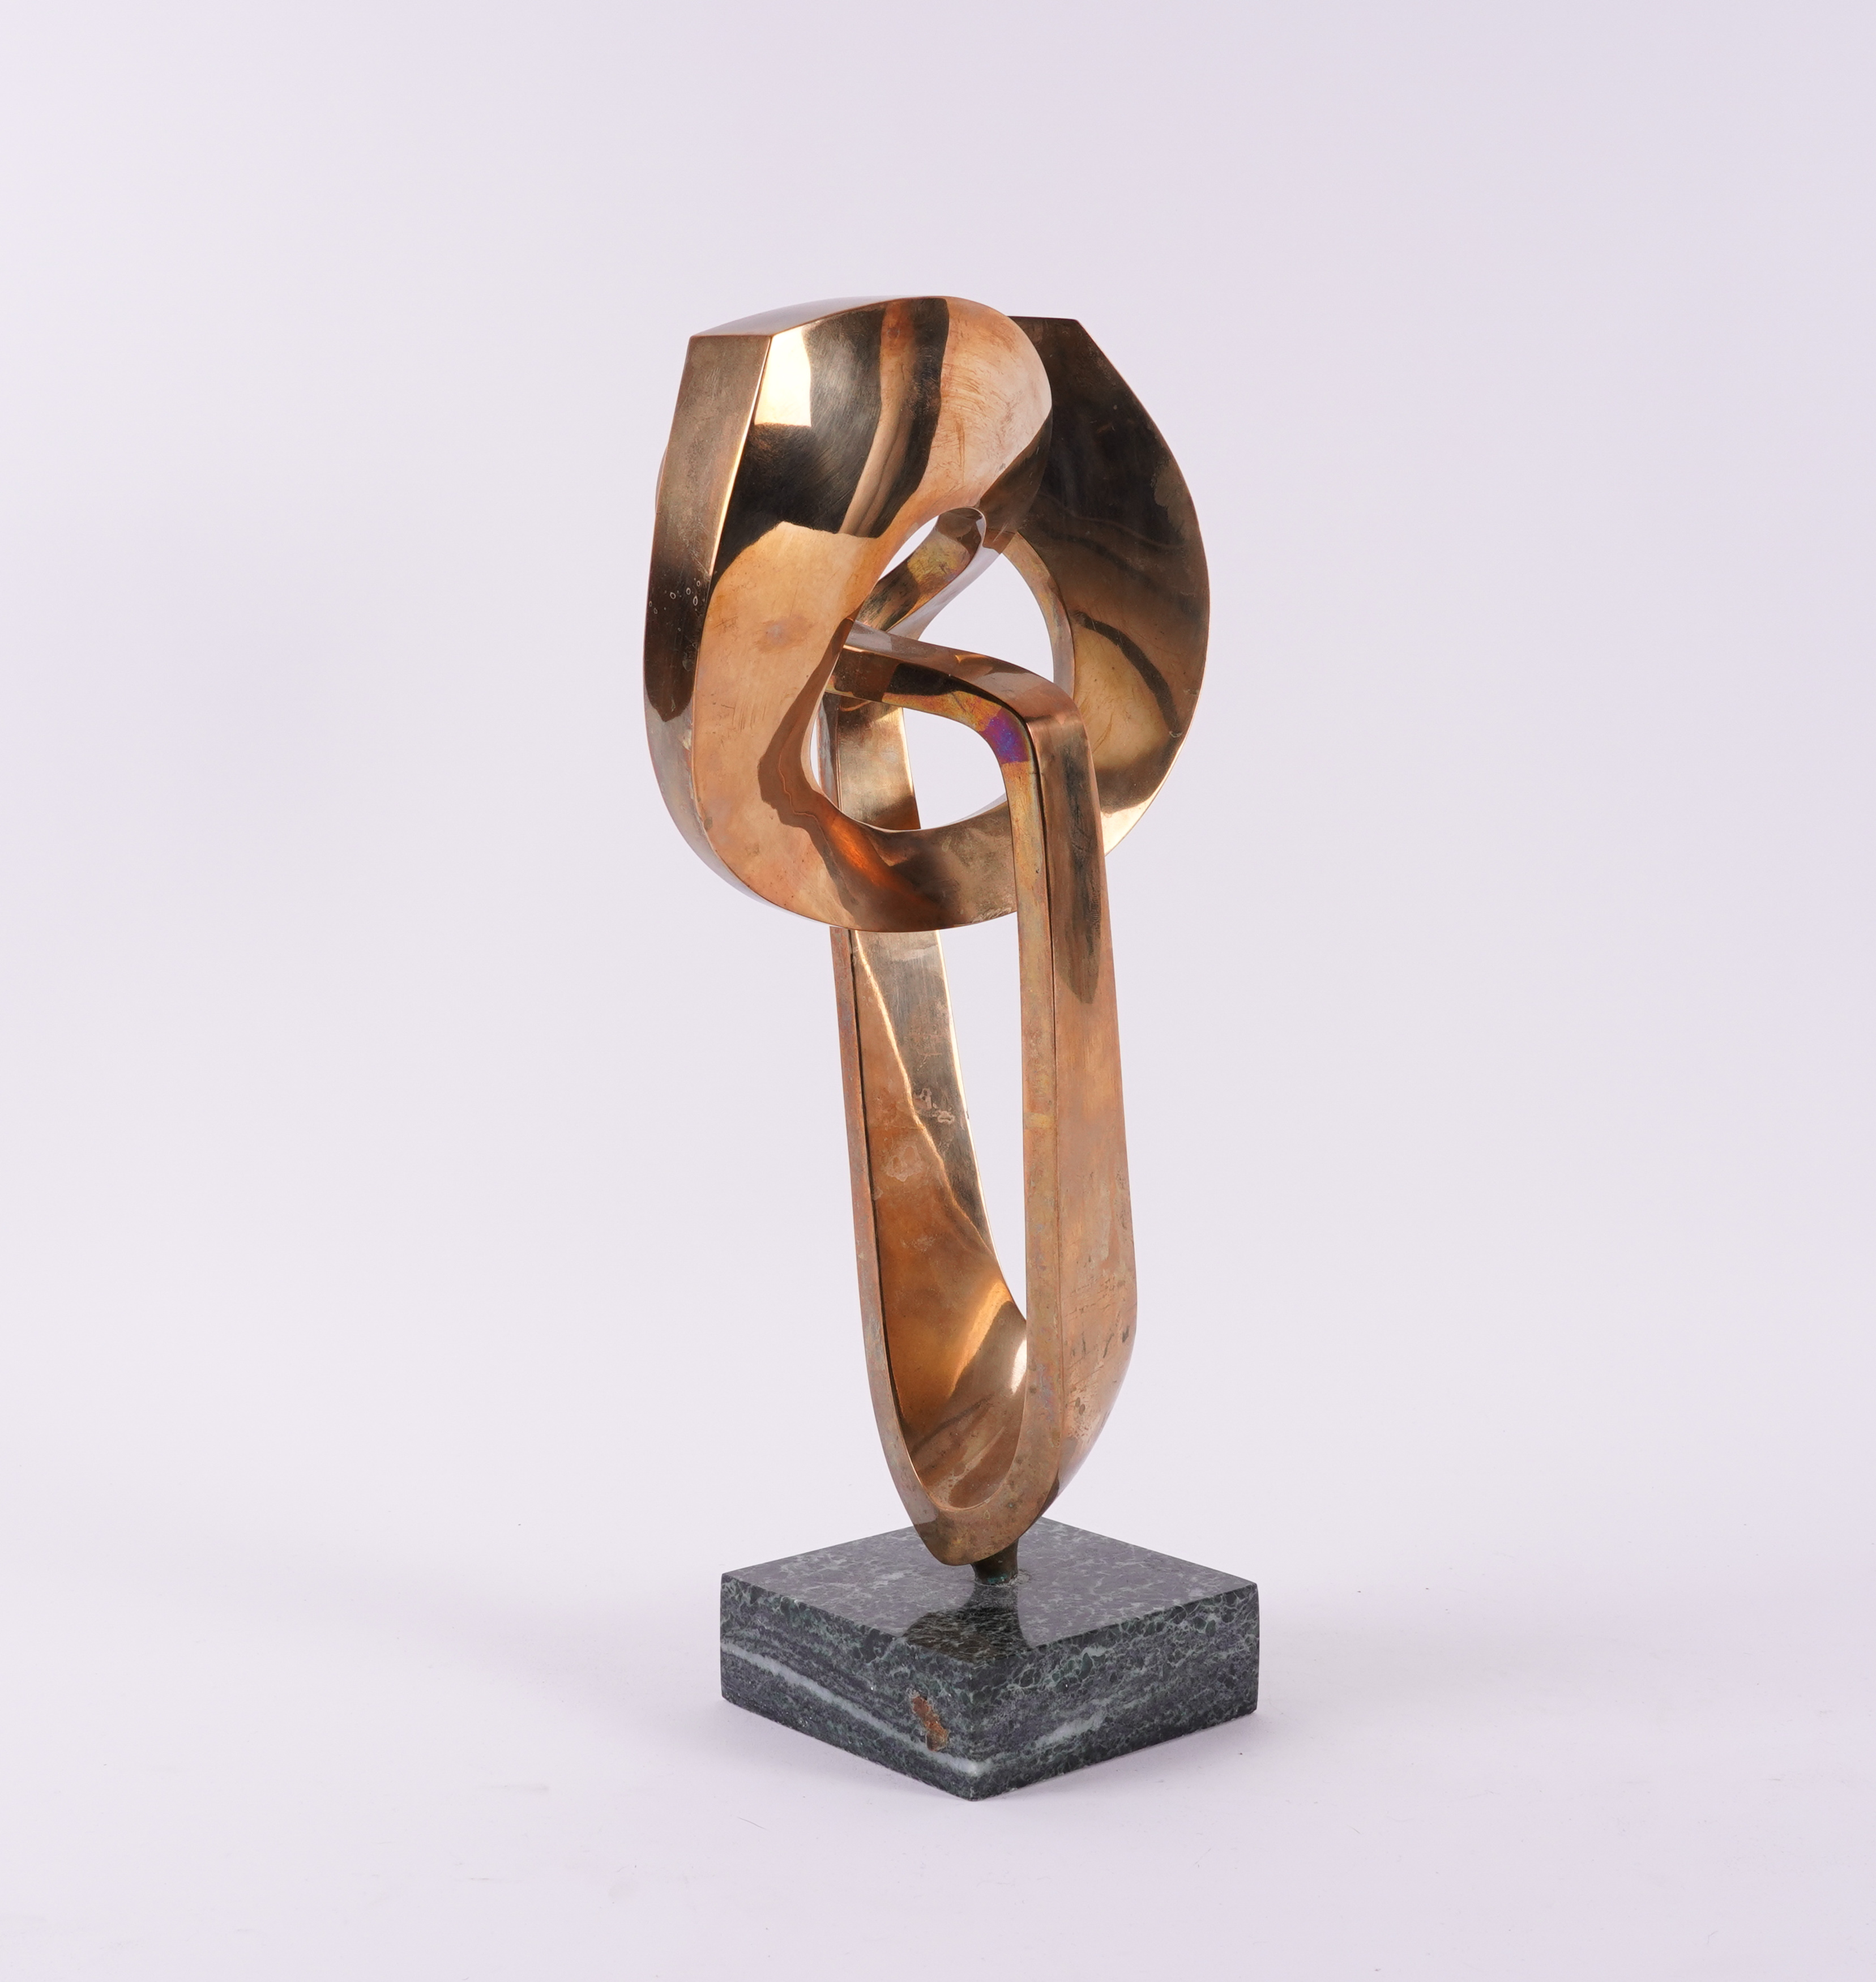 A MODERNIST POLISHED BRASS TWISTED SCULPTURE - Image 5 of 5